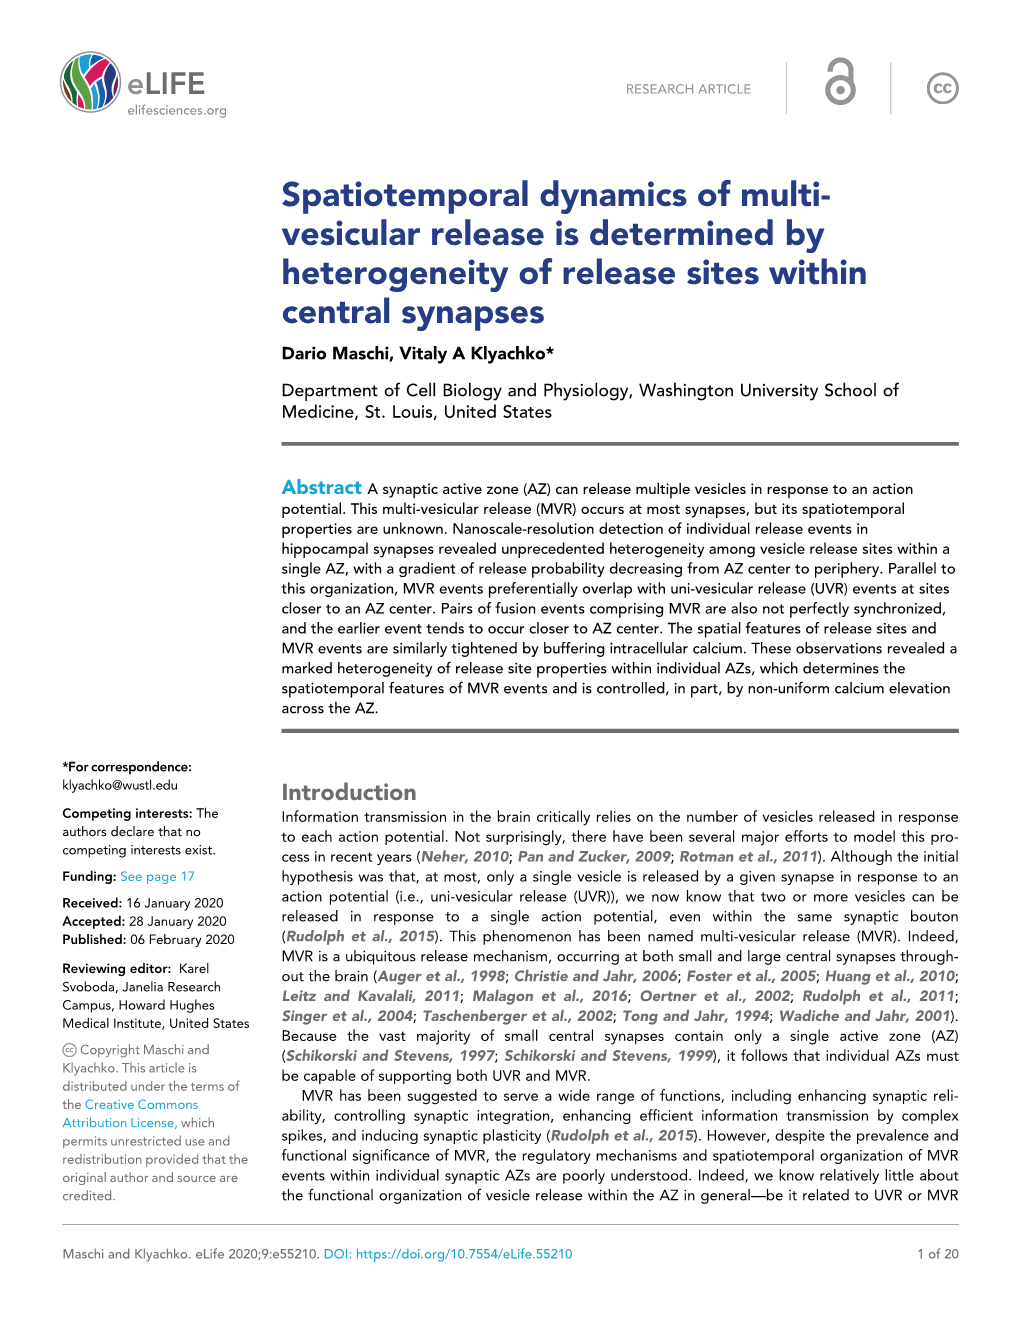 Spatiotemporal Dynamics of Multi- Vesicular Release Is Determined by Heterogeneity of Release Sites Within Central Synapses Dario Maschi, Vitaly a Klyachko*